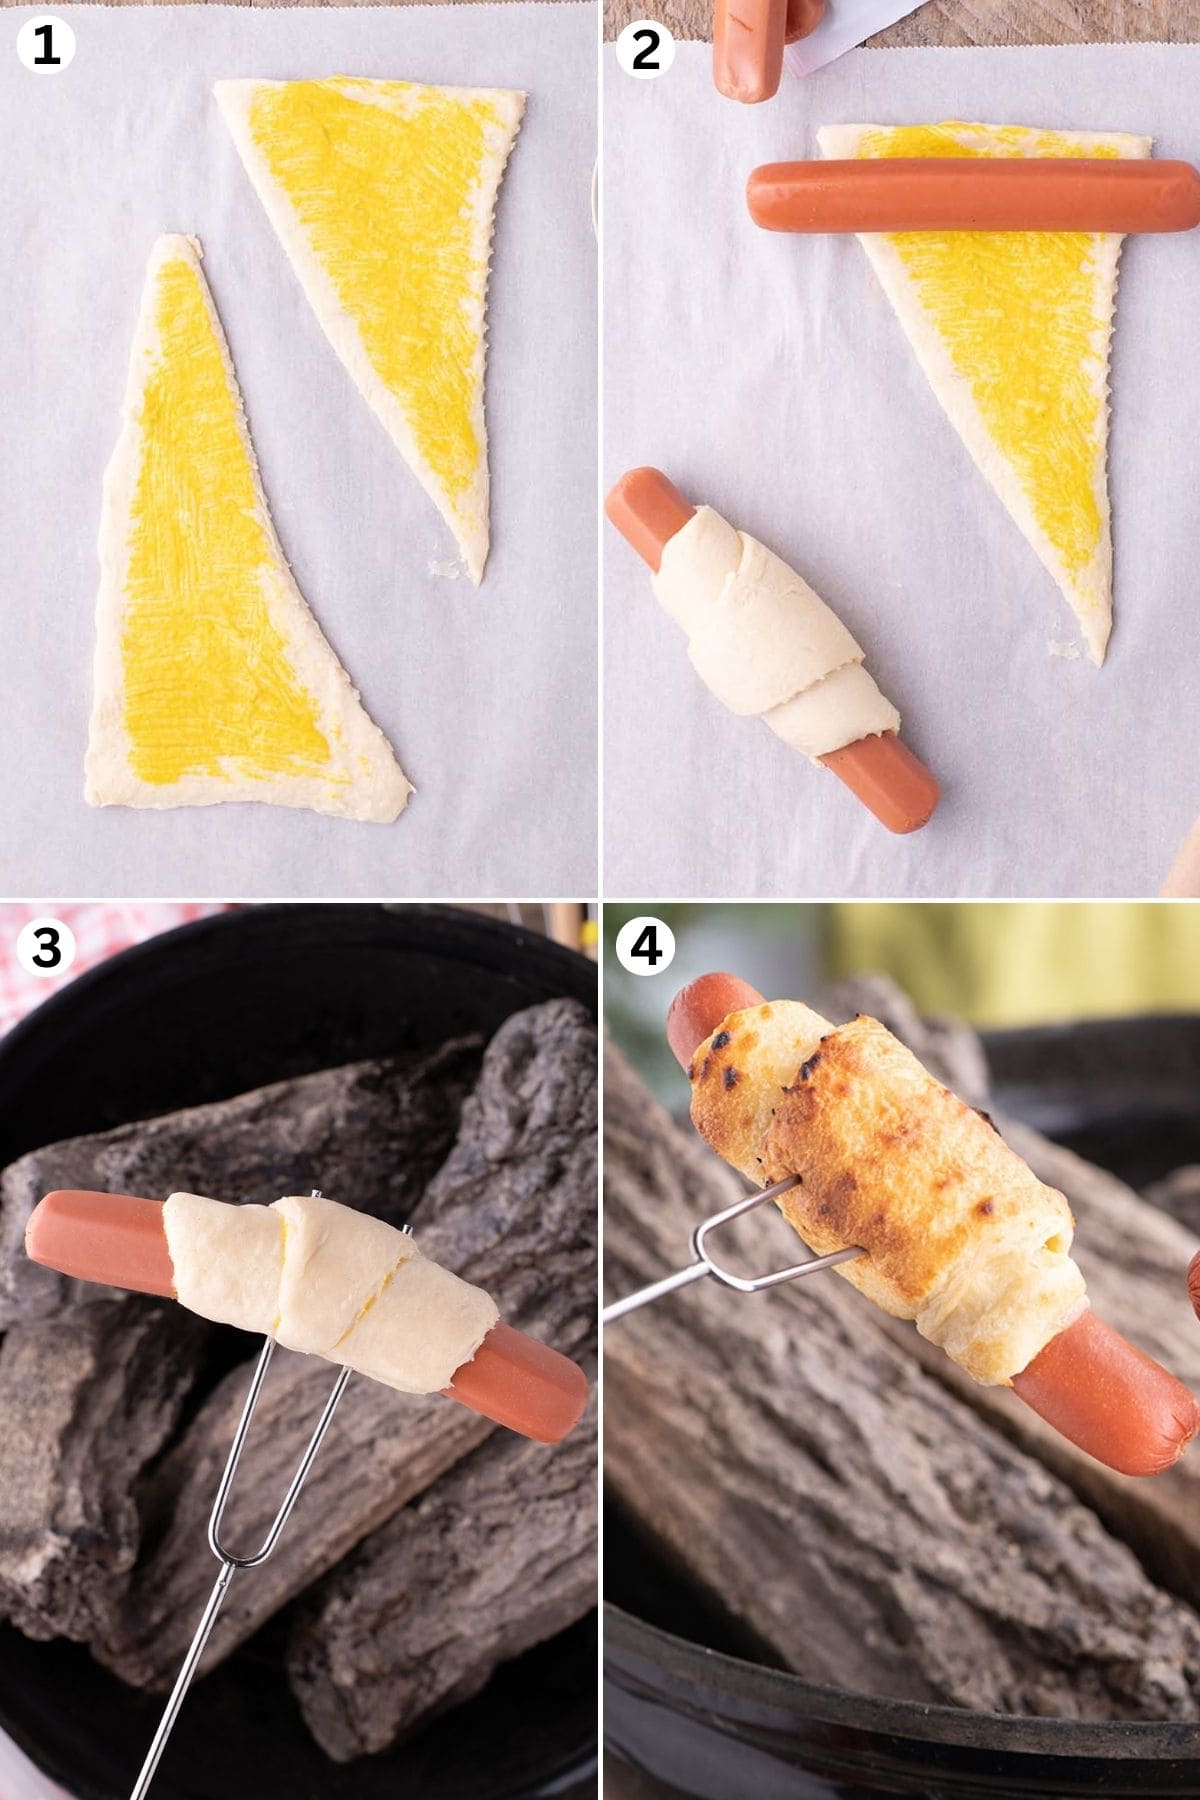 Brush each triangle dough with mustard. Wrap one dough triangle around each hot dog. Insert the hotdog into a clean skewer and place over the embers of your fire. Cook and rotate the skewer frequently to ensure even cooking and prevent burning. 